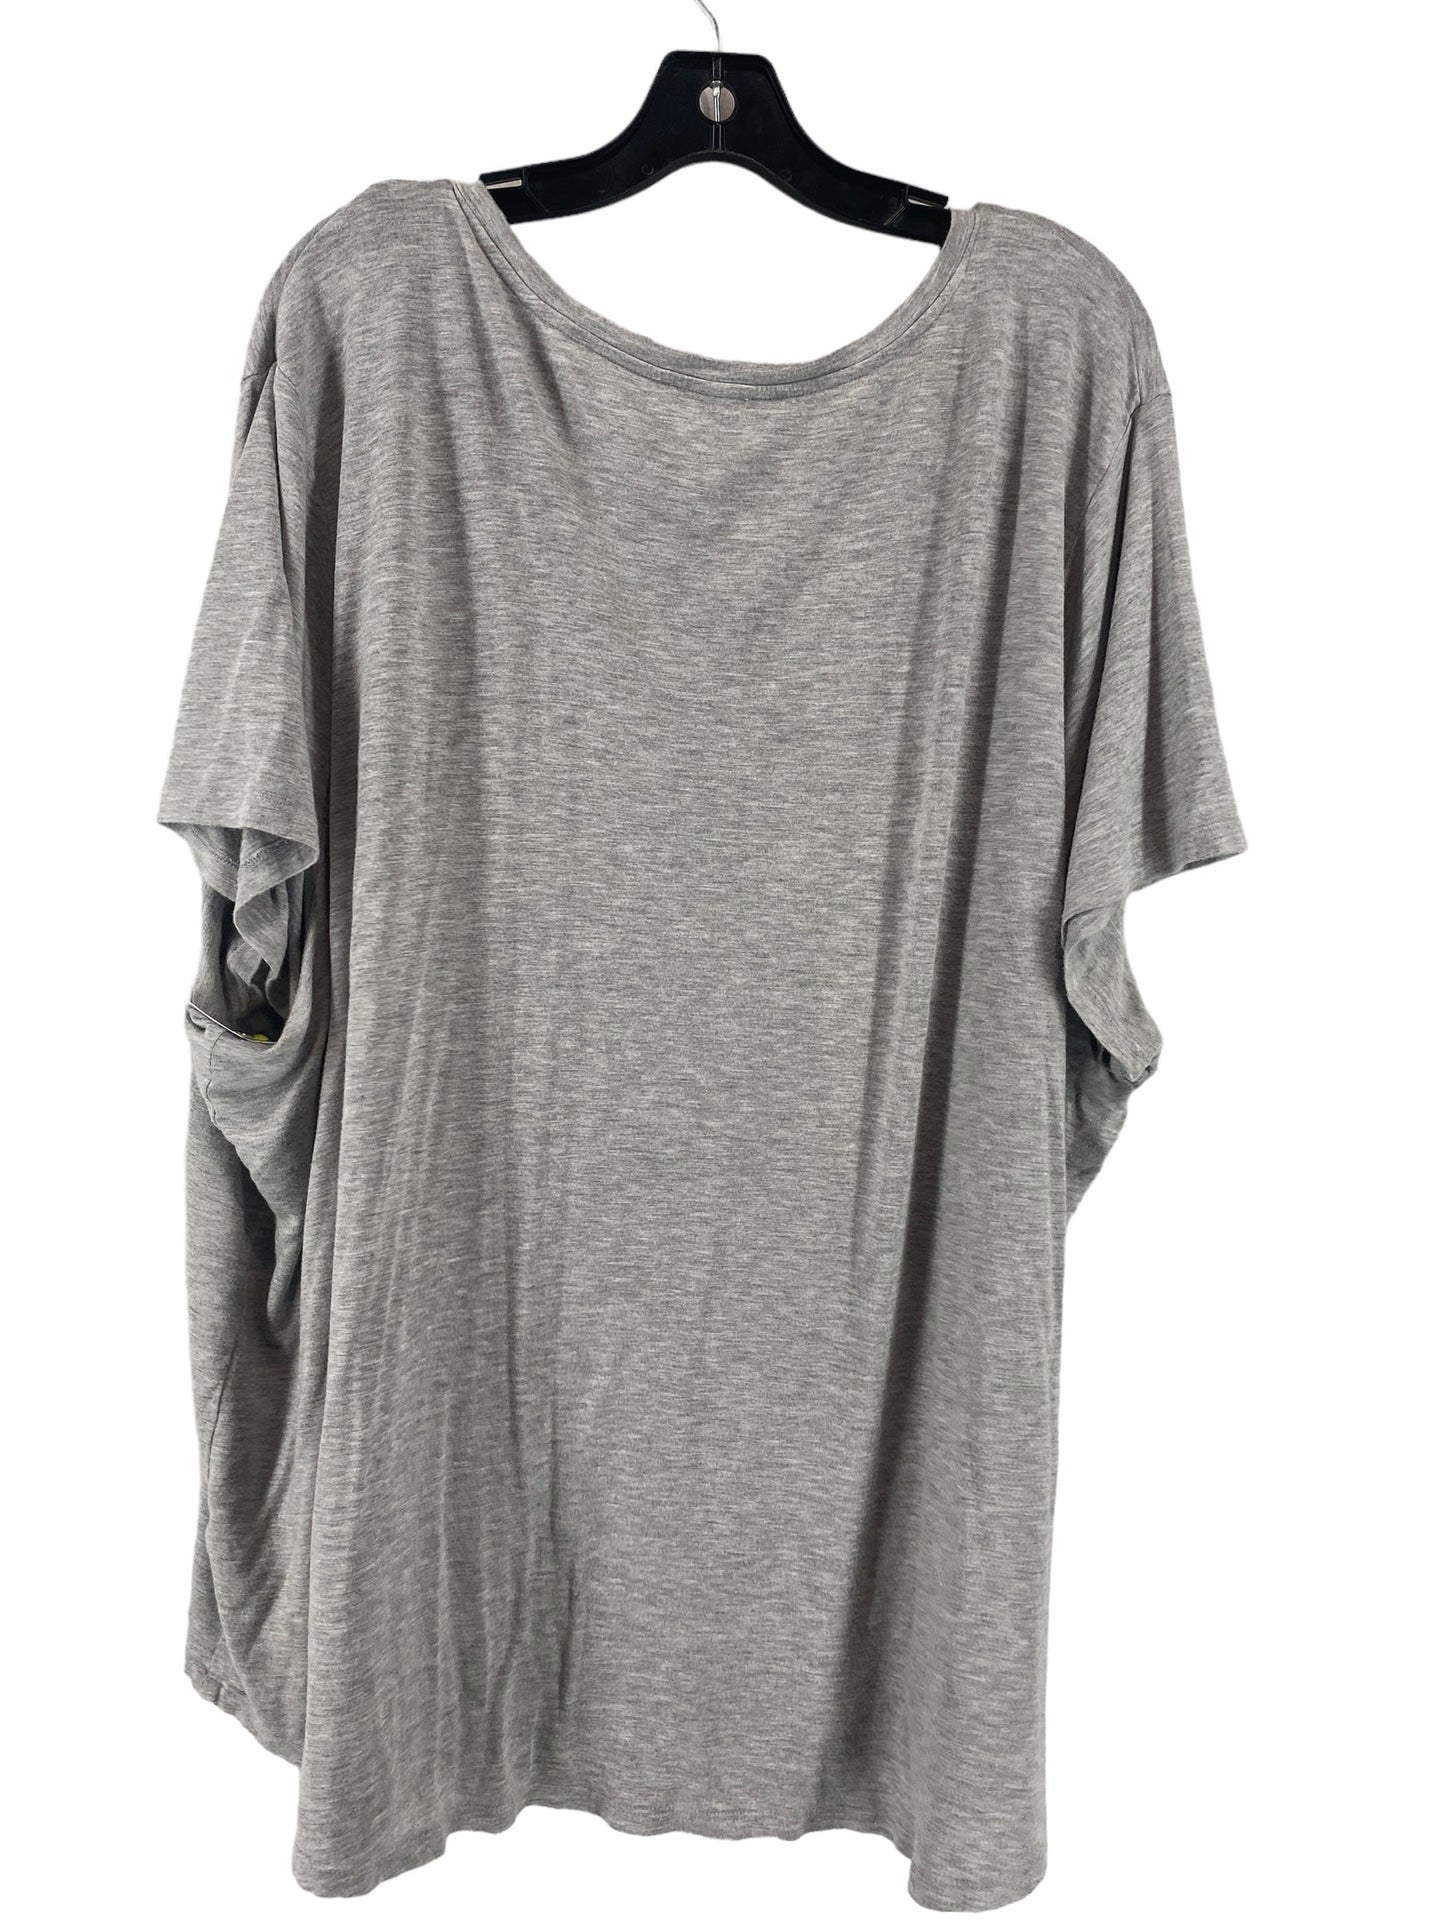 Grey Top Short Sleeve Maurices, Size 4x